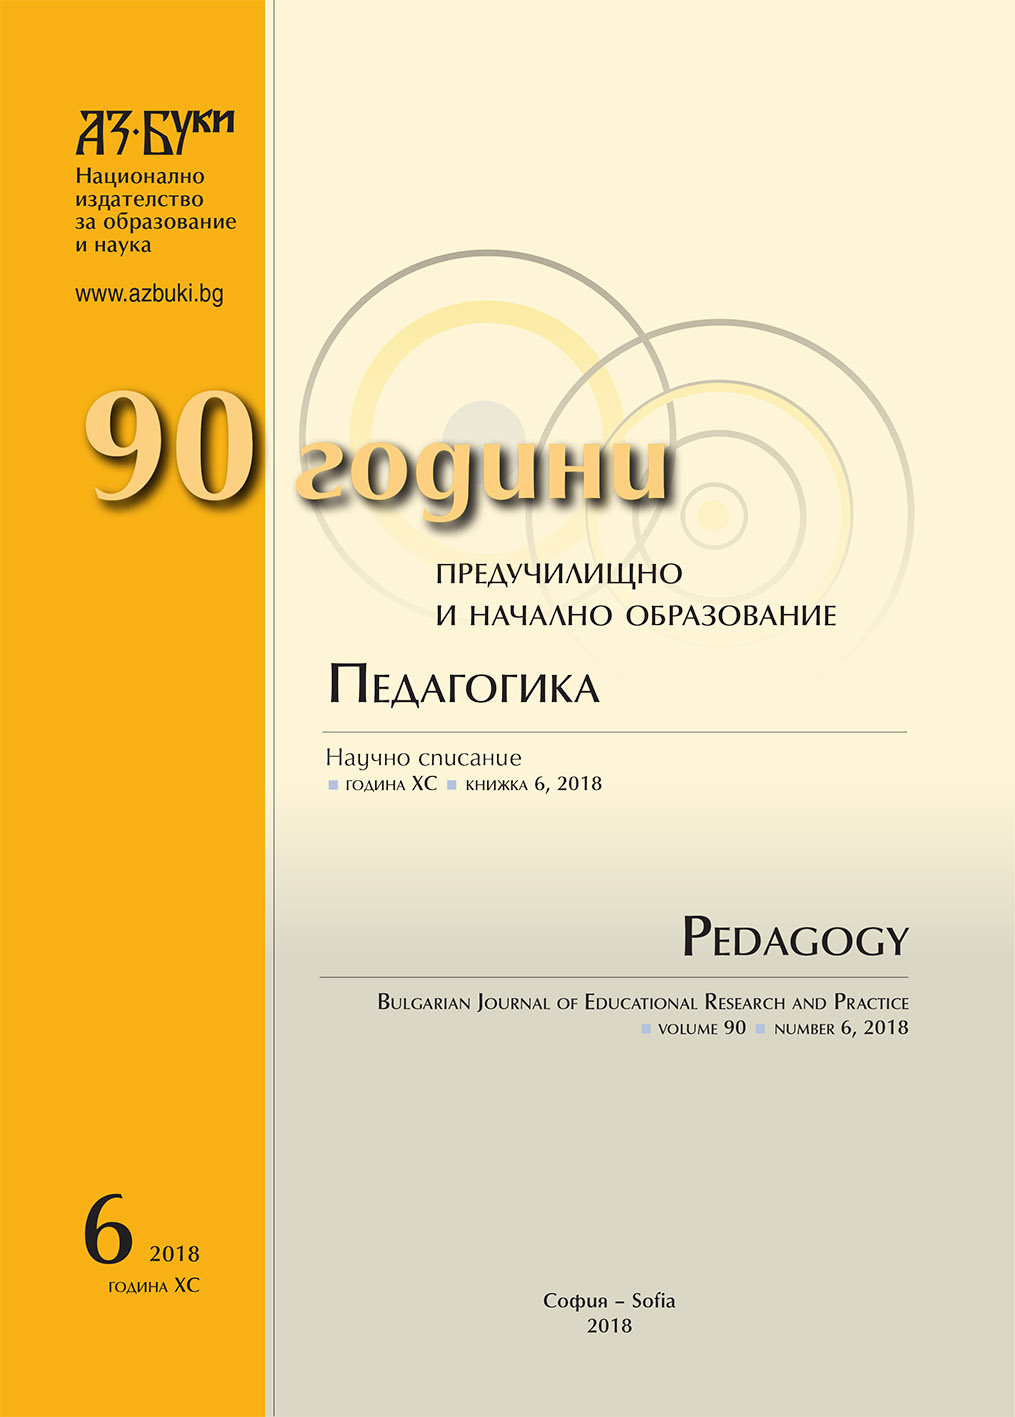 Development of Entrepreneurial Competences in Primary School System in the Republic of Croatia, with a Focus on Competences for Social Entrepreneurship